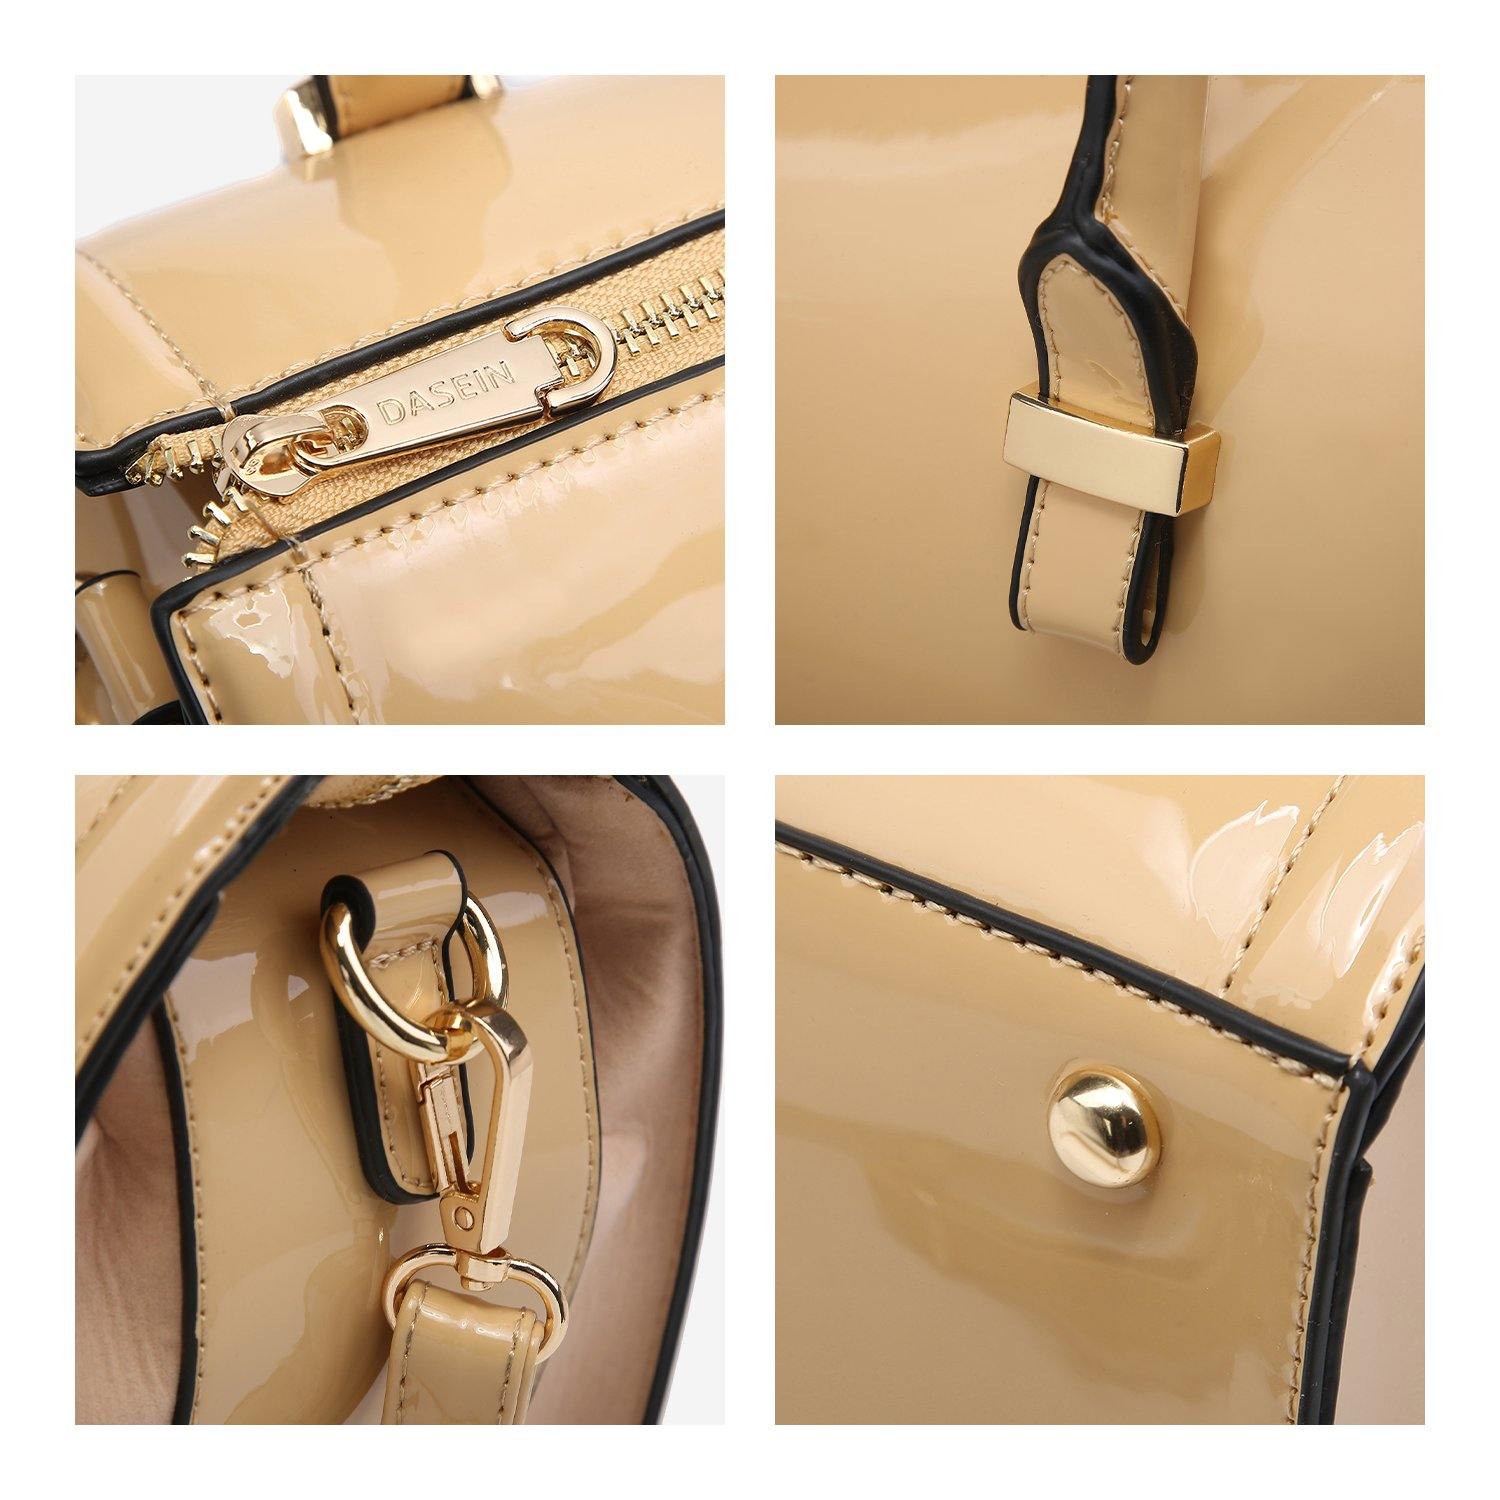 patent leather bag